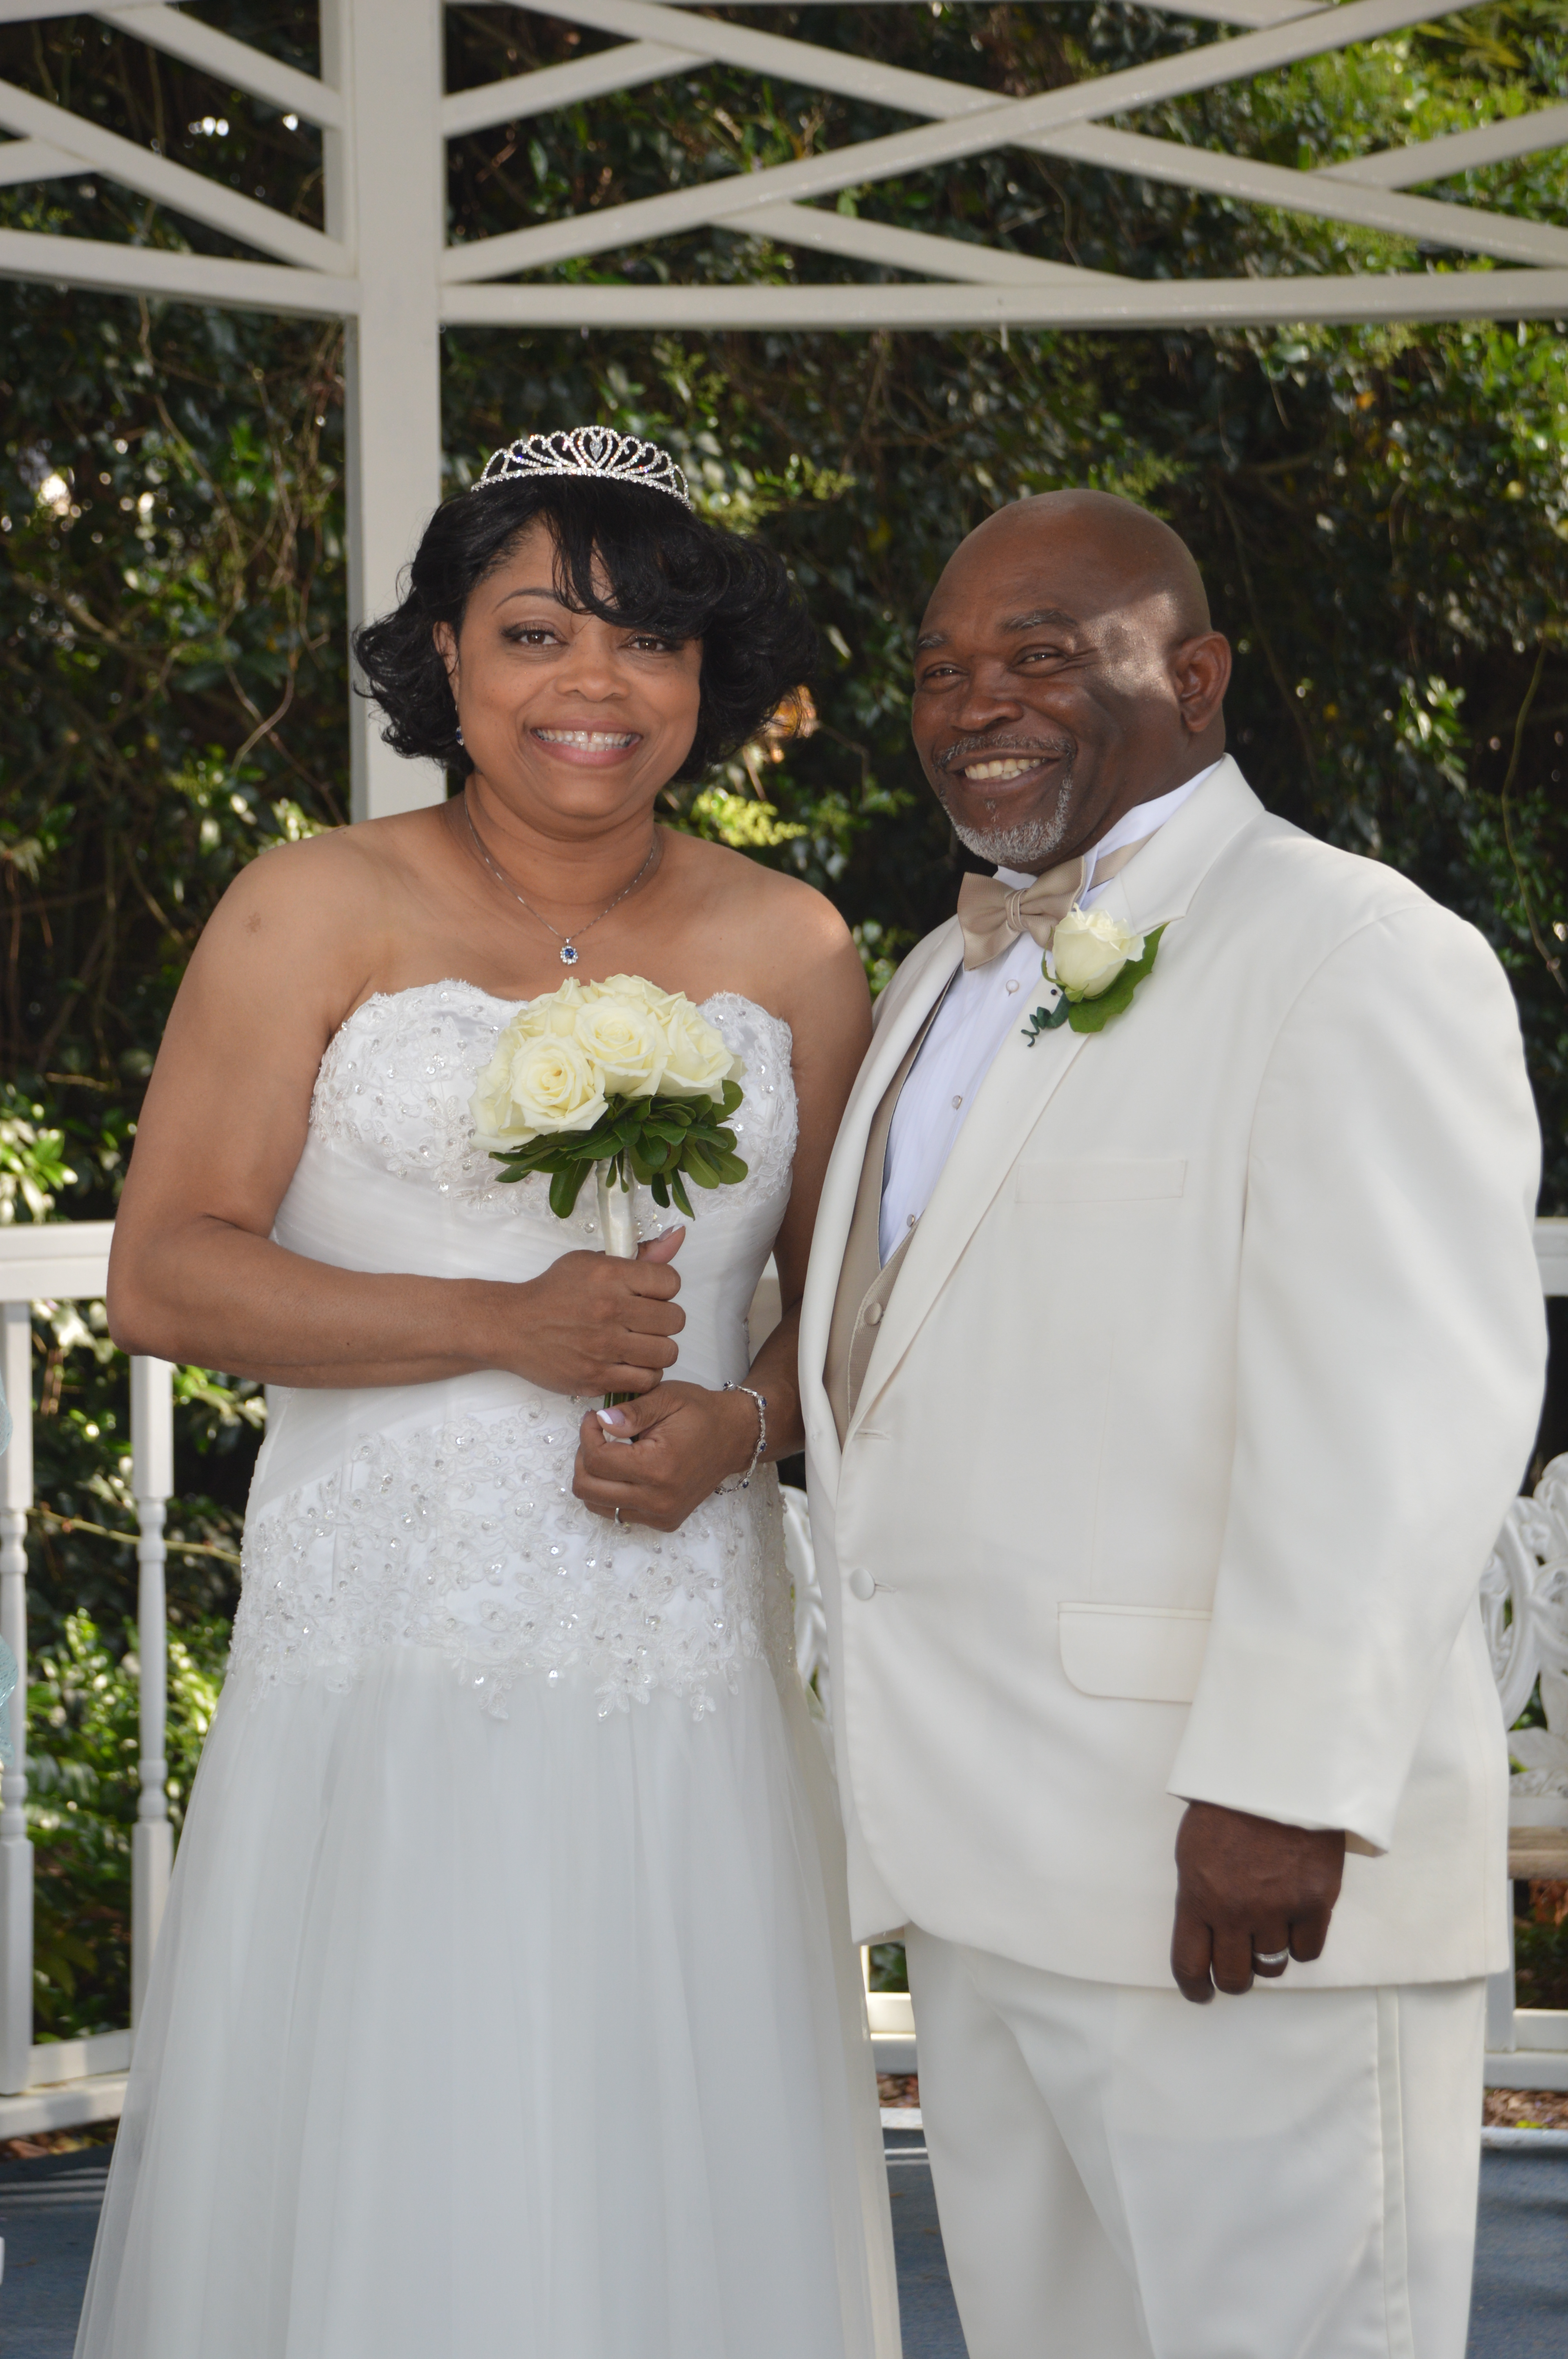 Evans & Robinson - April 11, 2015; married at Wedding ...